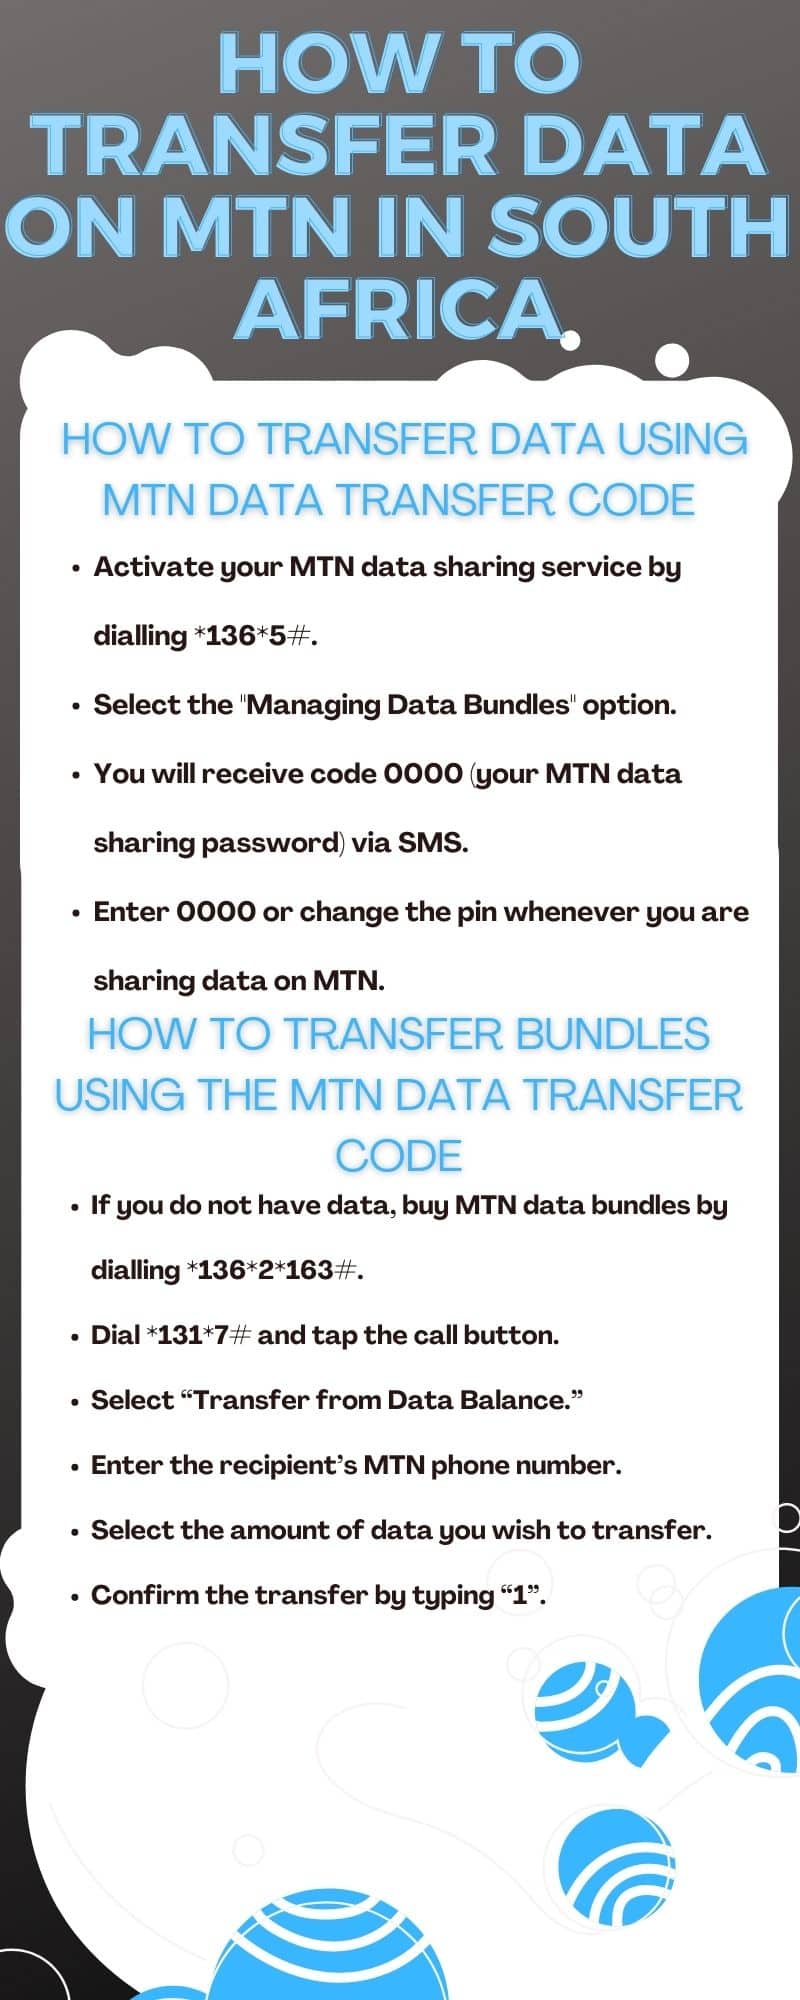 How to transfer data on MTN in South Africa